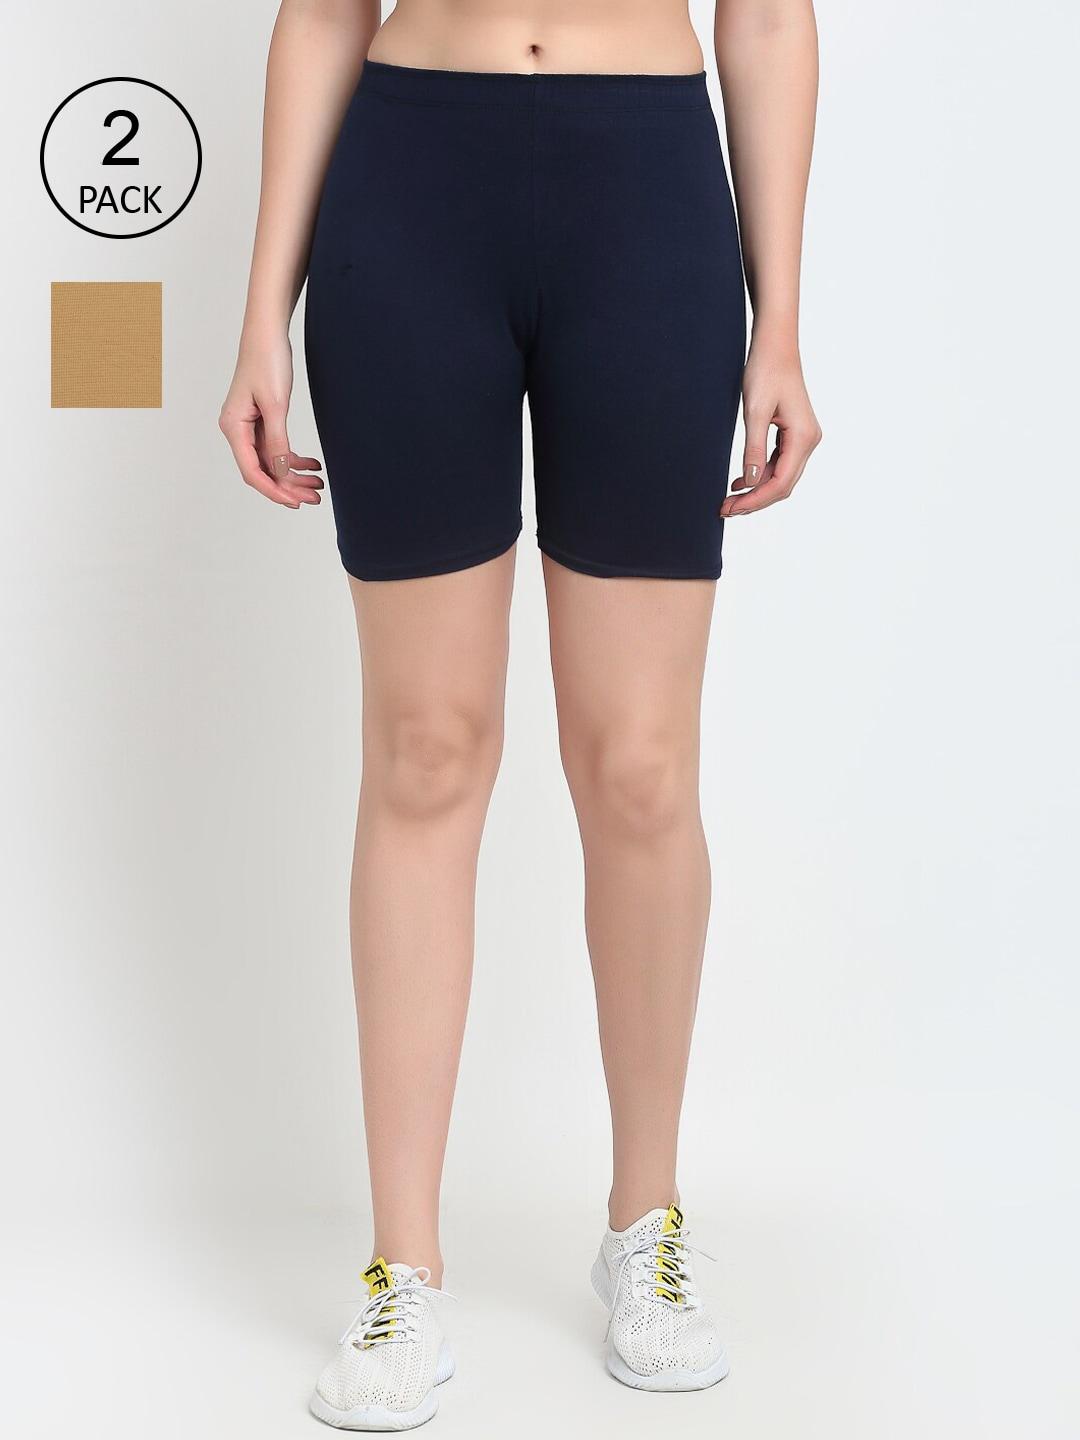 gracit-women-pack-of-2-navy-blue-&-nude-cycling-sports-shorts